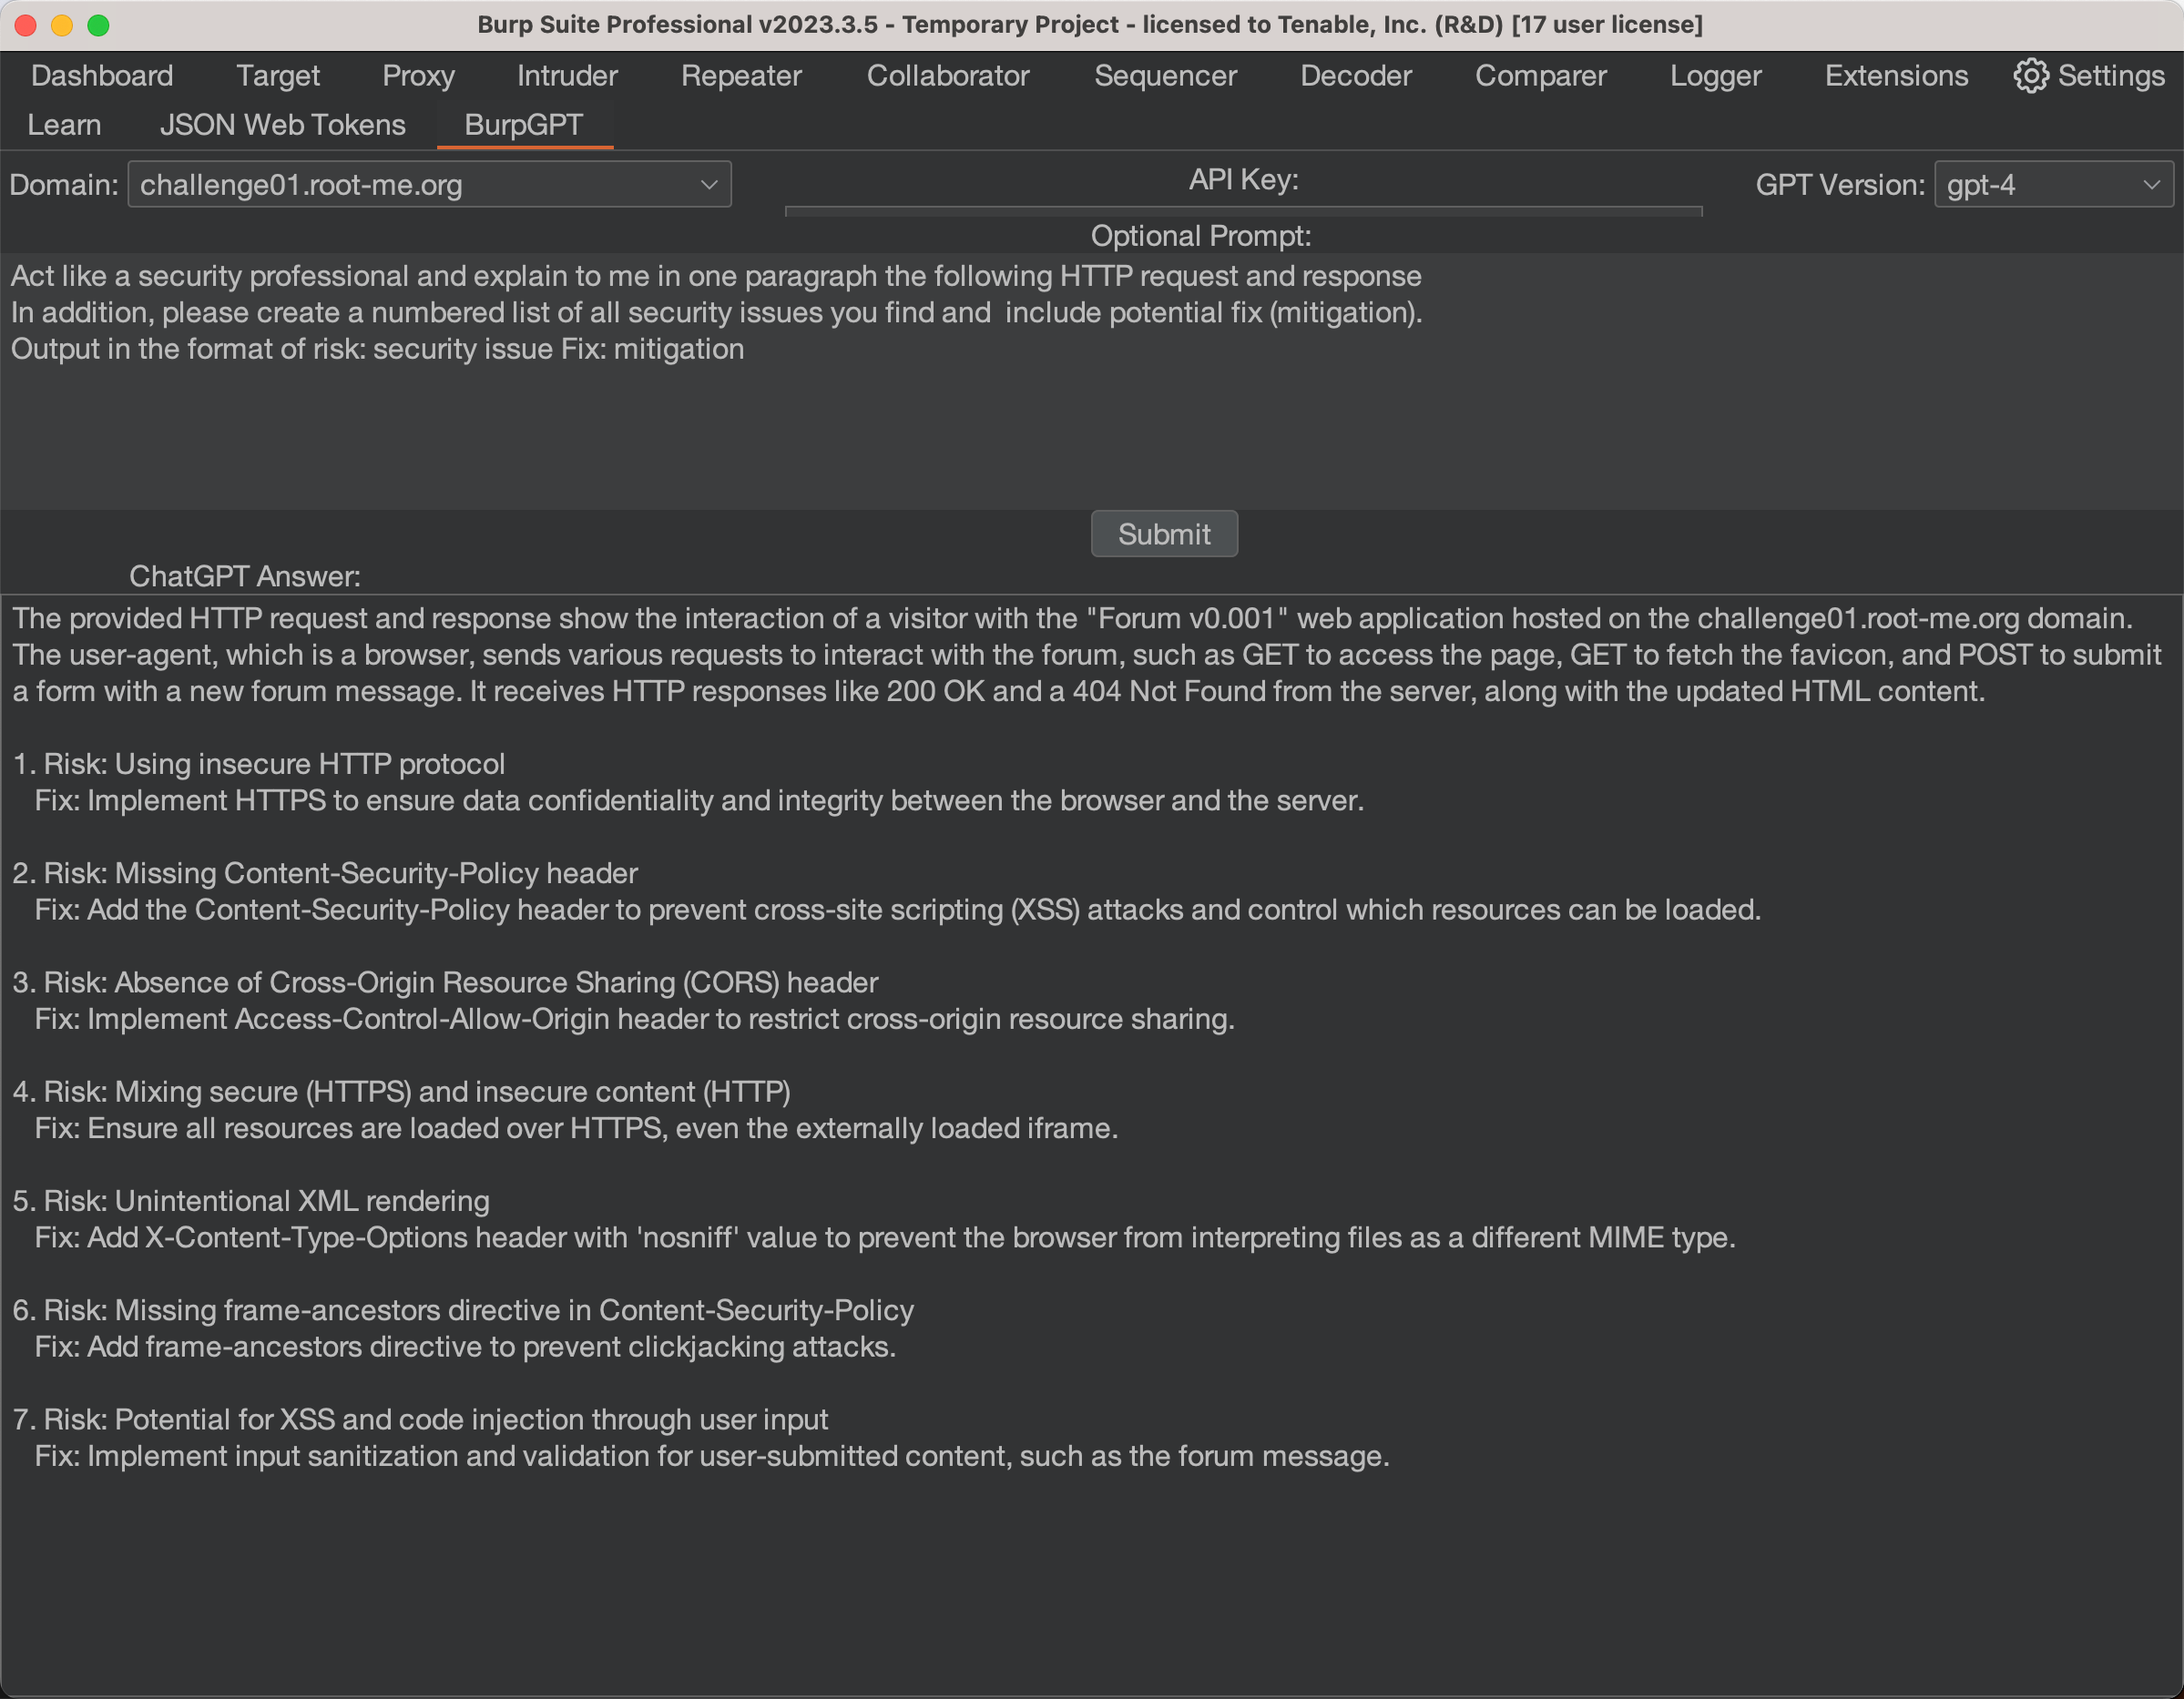 Screenshot of Burp Suite with a ChatGPT answer listing web security risks and corresponding mitigation strategies.